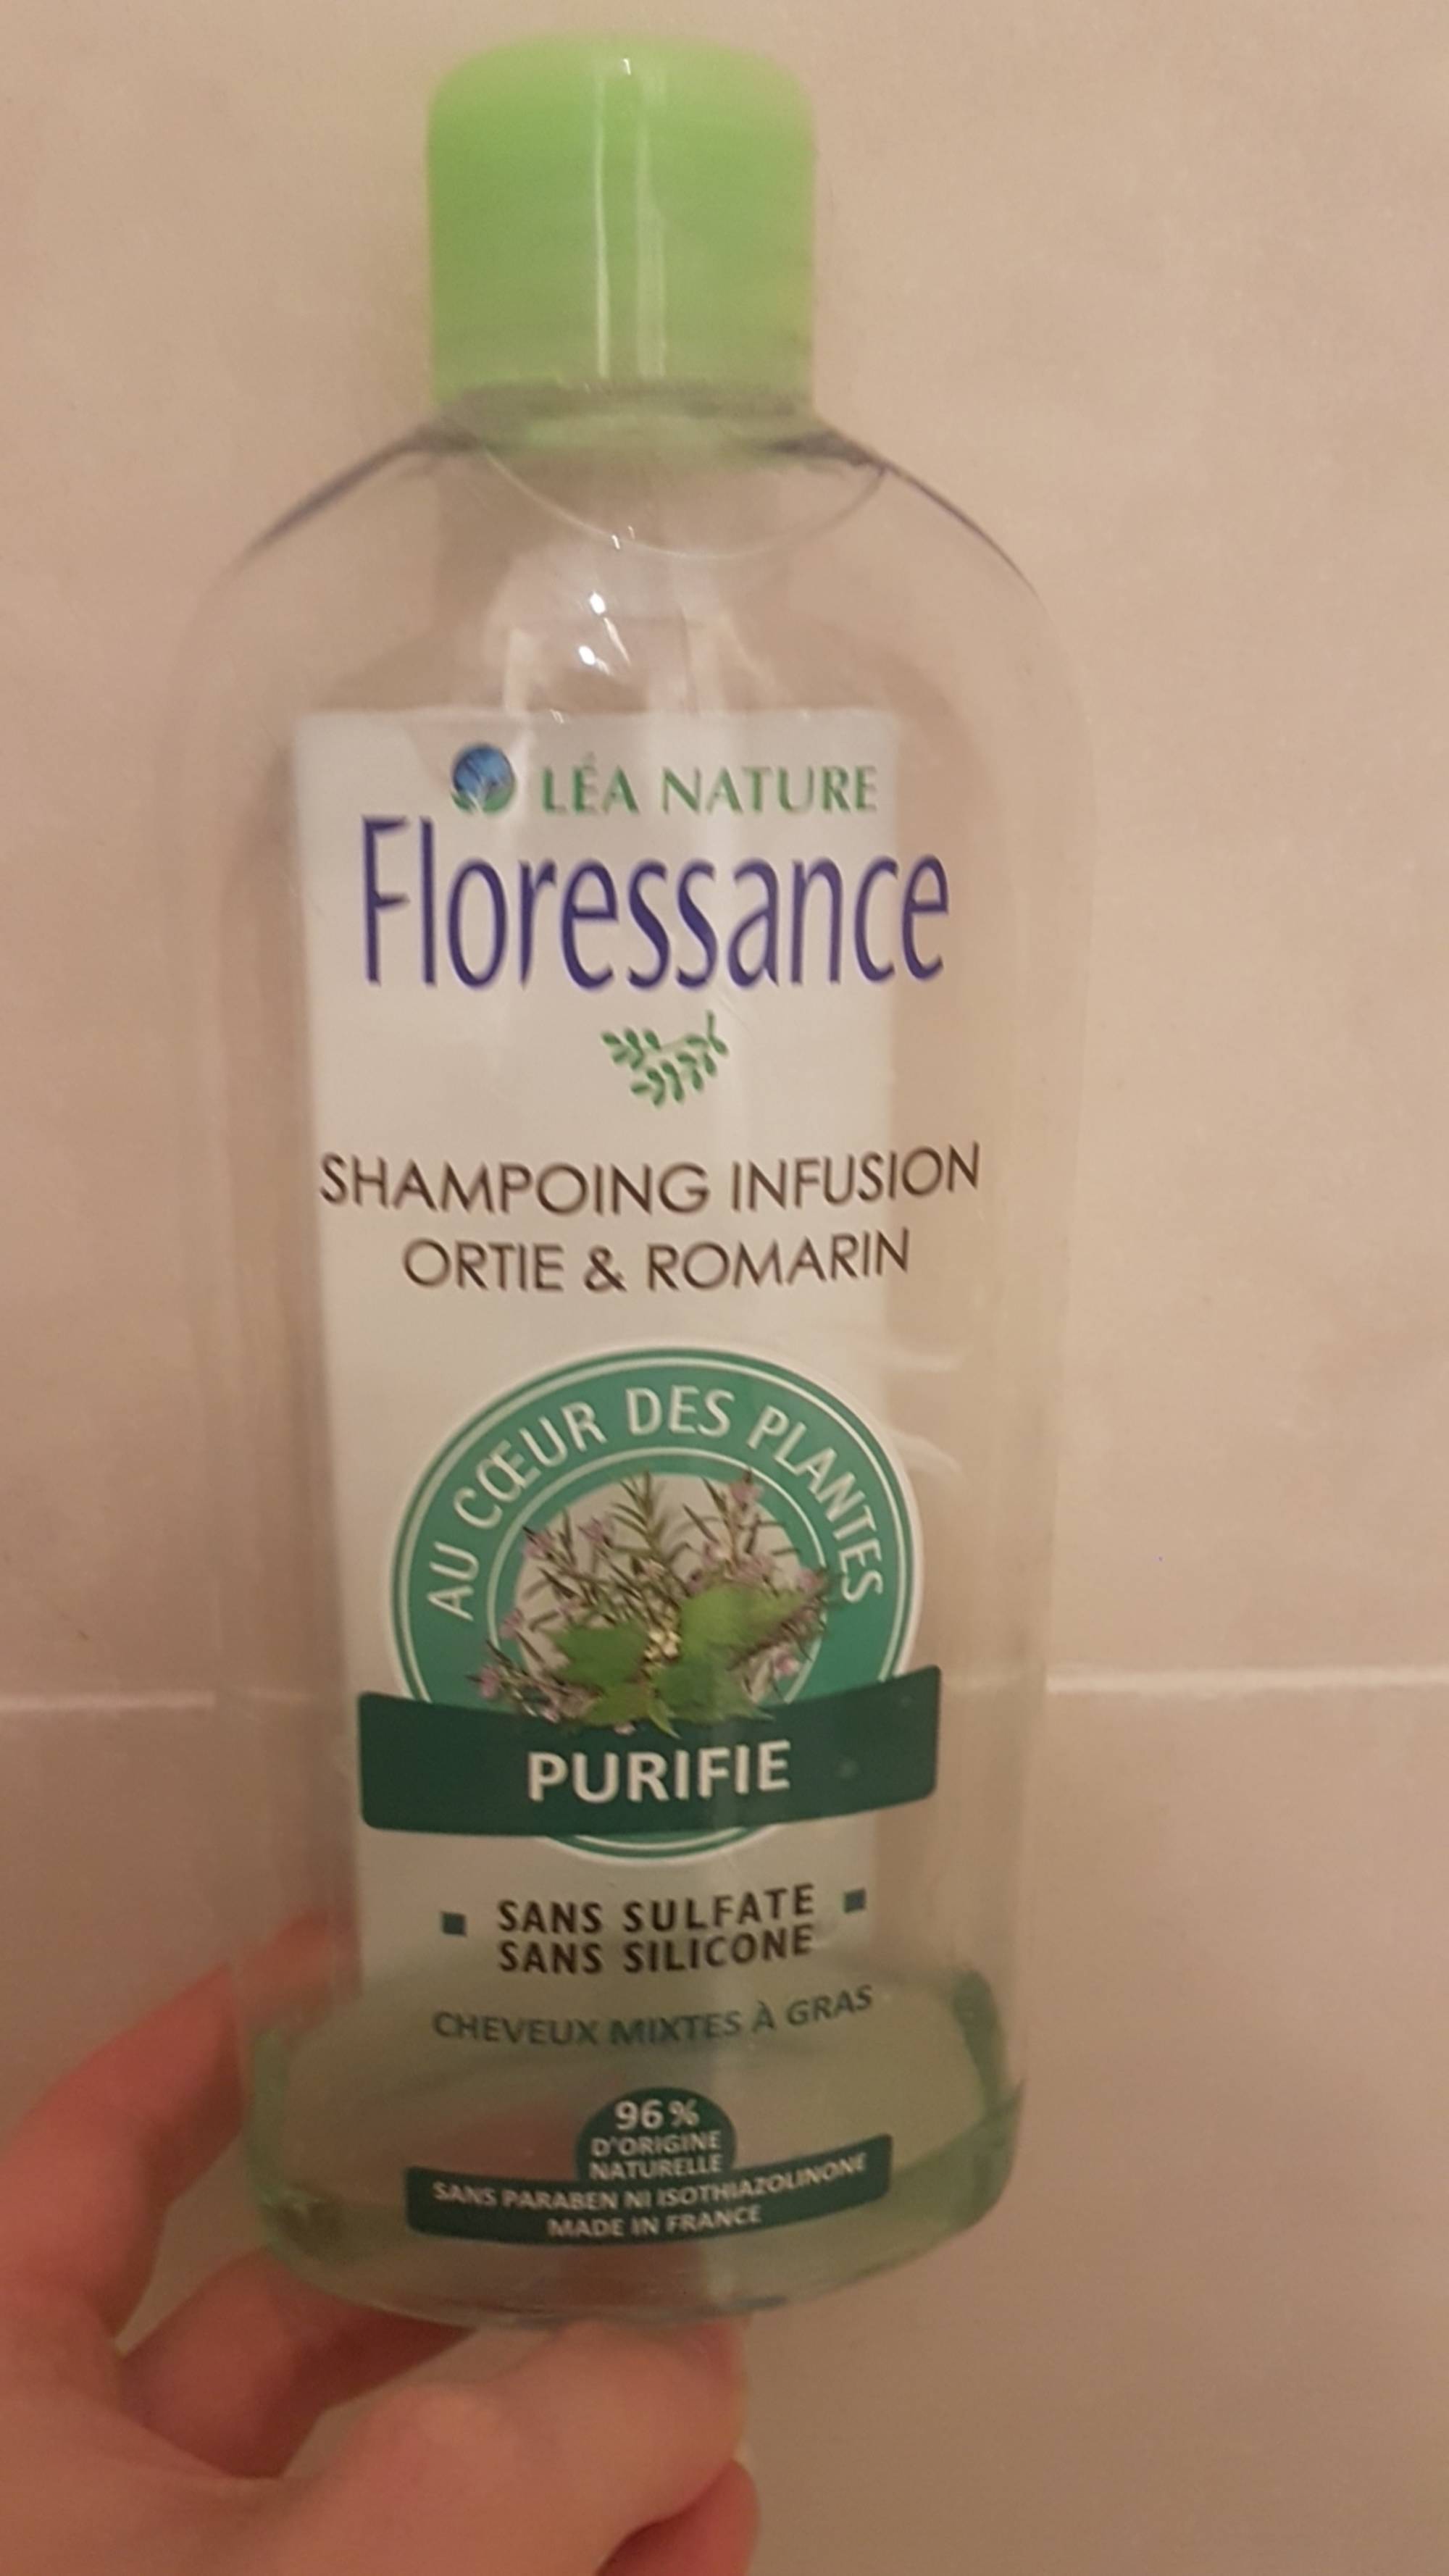 LÉA NATURE FLORESSANCE - Shampoing infusion ortie & romarin